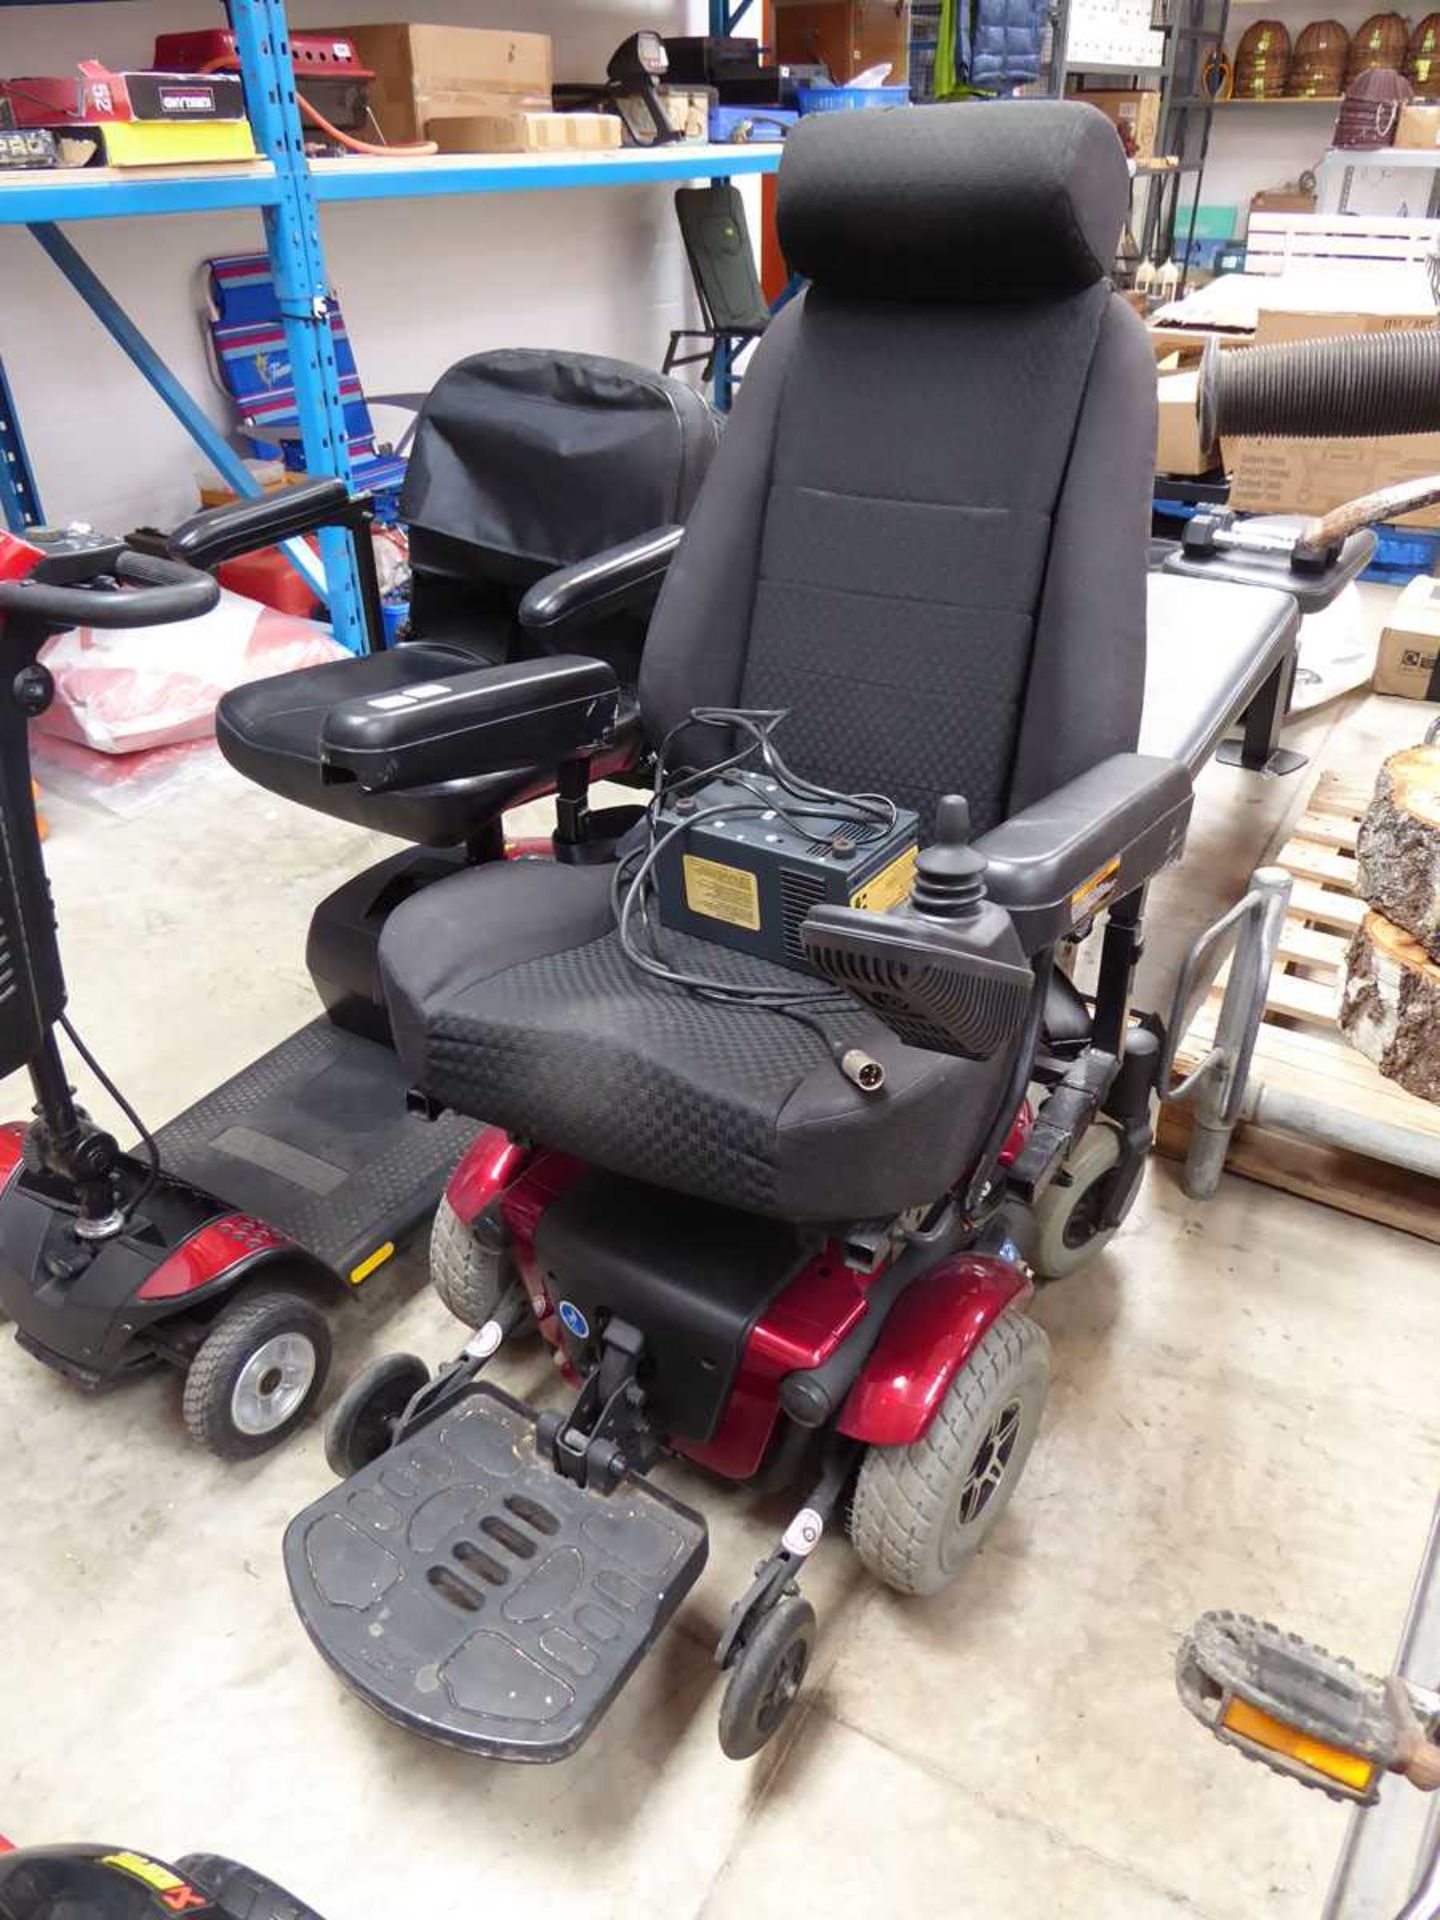 Jet 3 Ultra battery operated disability chair with charger